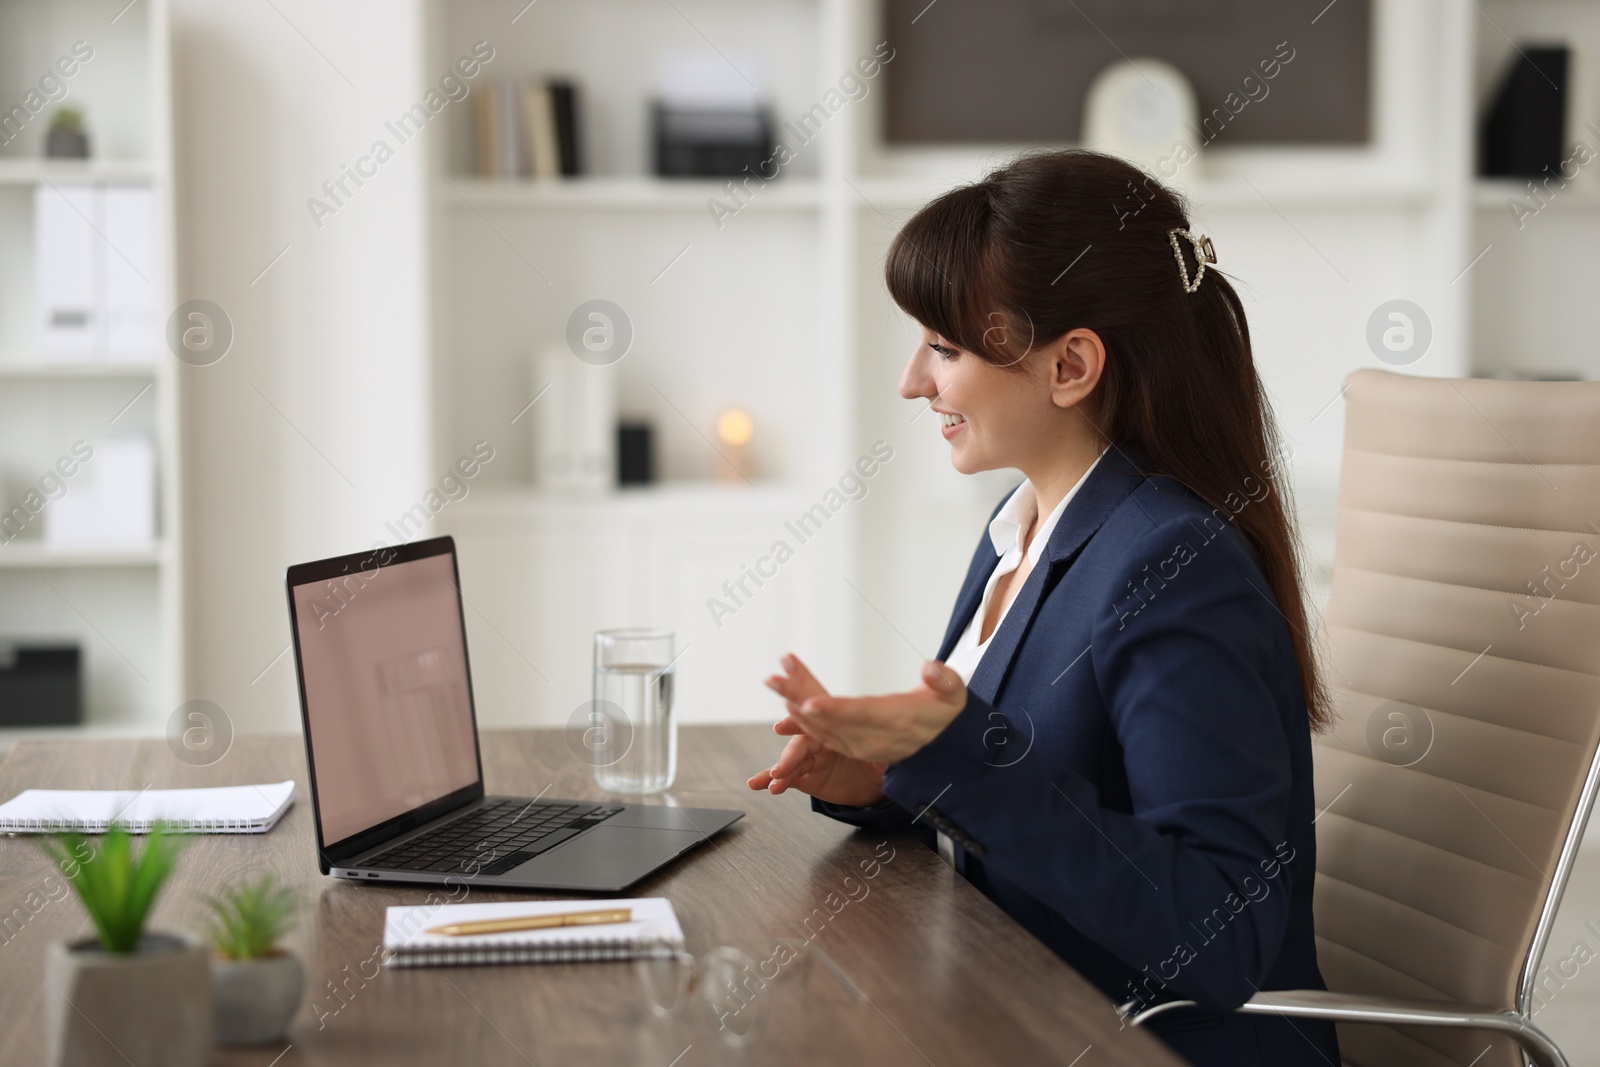 Photo of Woman using video chat during webinar at wooden table in office